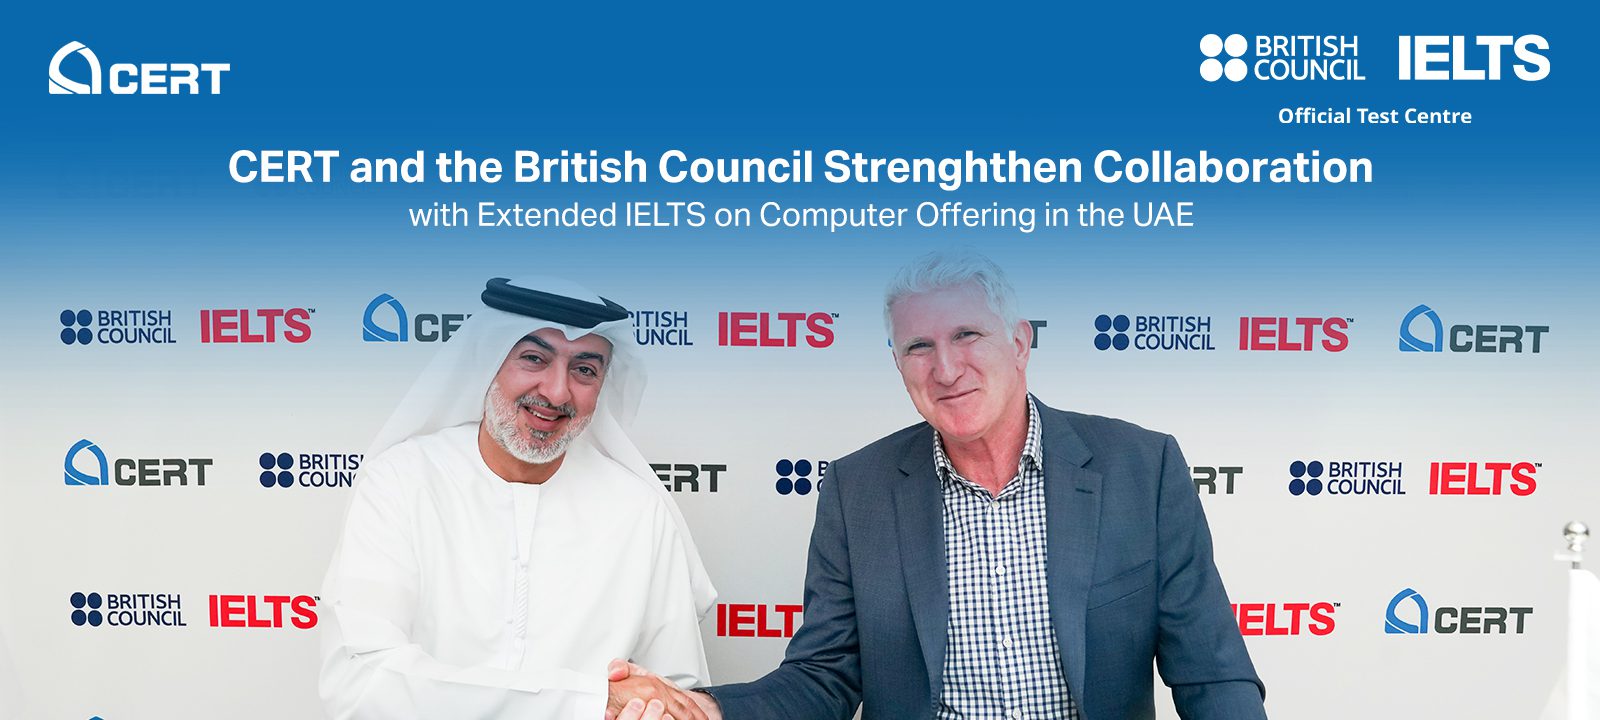 CERT and the British Council Strengthen Collaboration with Extended IELTS on Computer Offering in the UAE